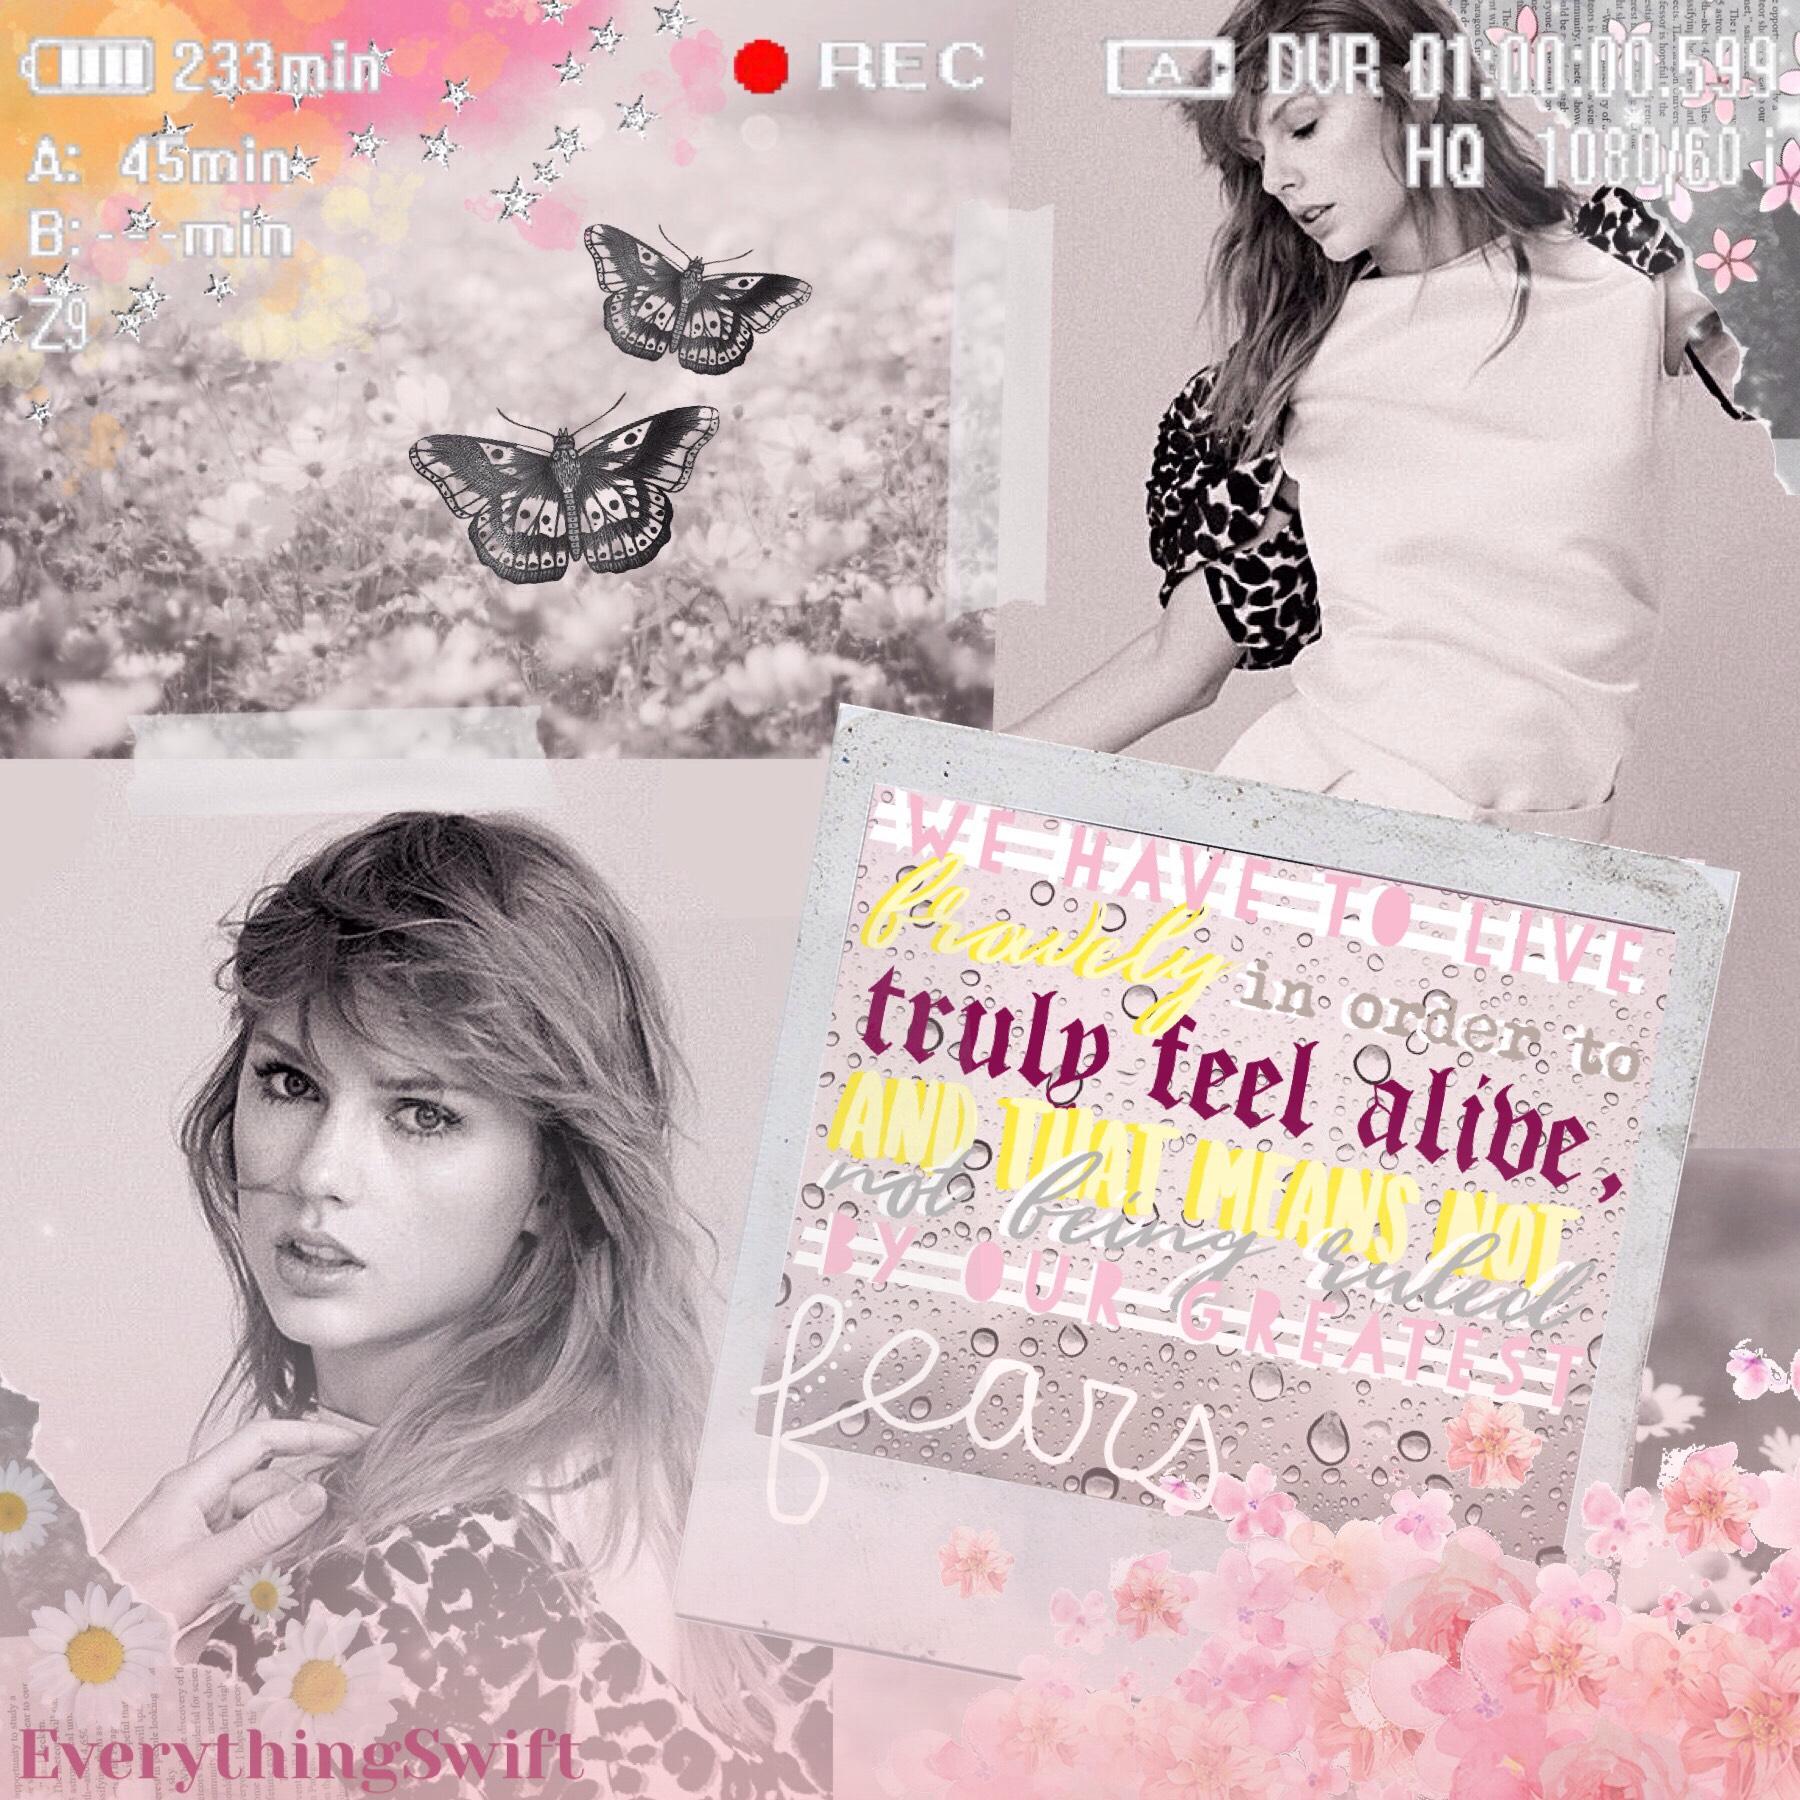 ❀ t a p ❀
I'm so excited for ts7! I can't wait any longer!
qotd: what did you do today? (sorry I don't know what to ask)
aotd: I went to school and I have hip-hop class later
